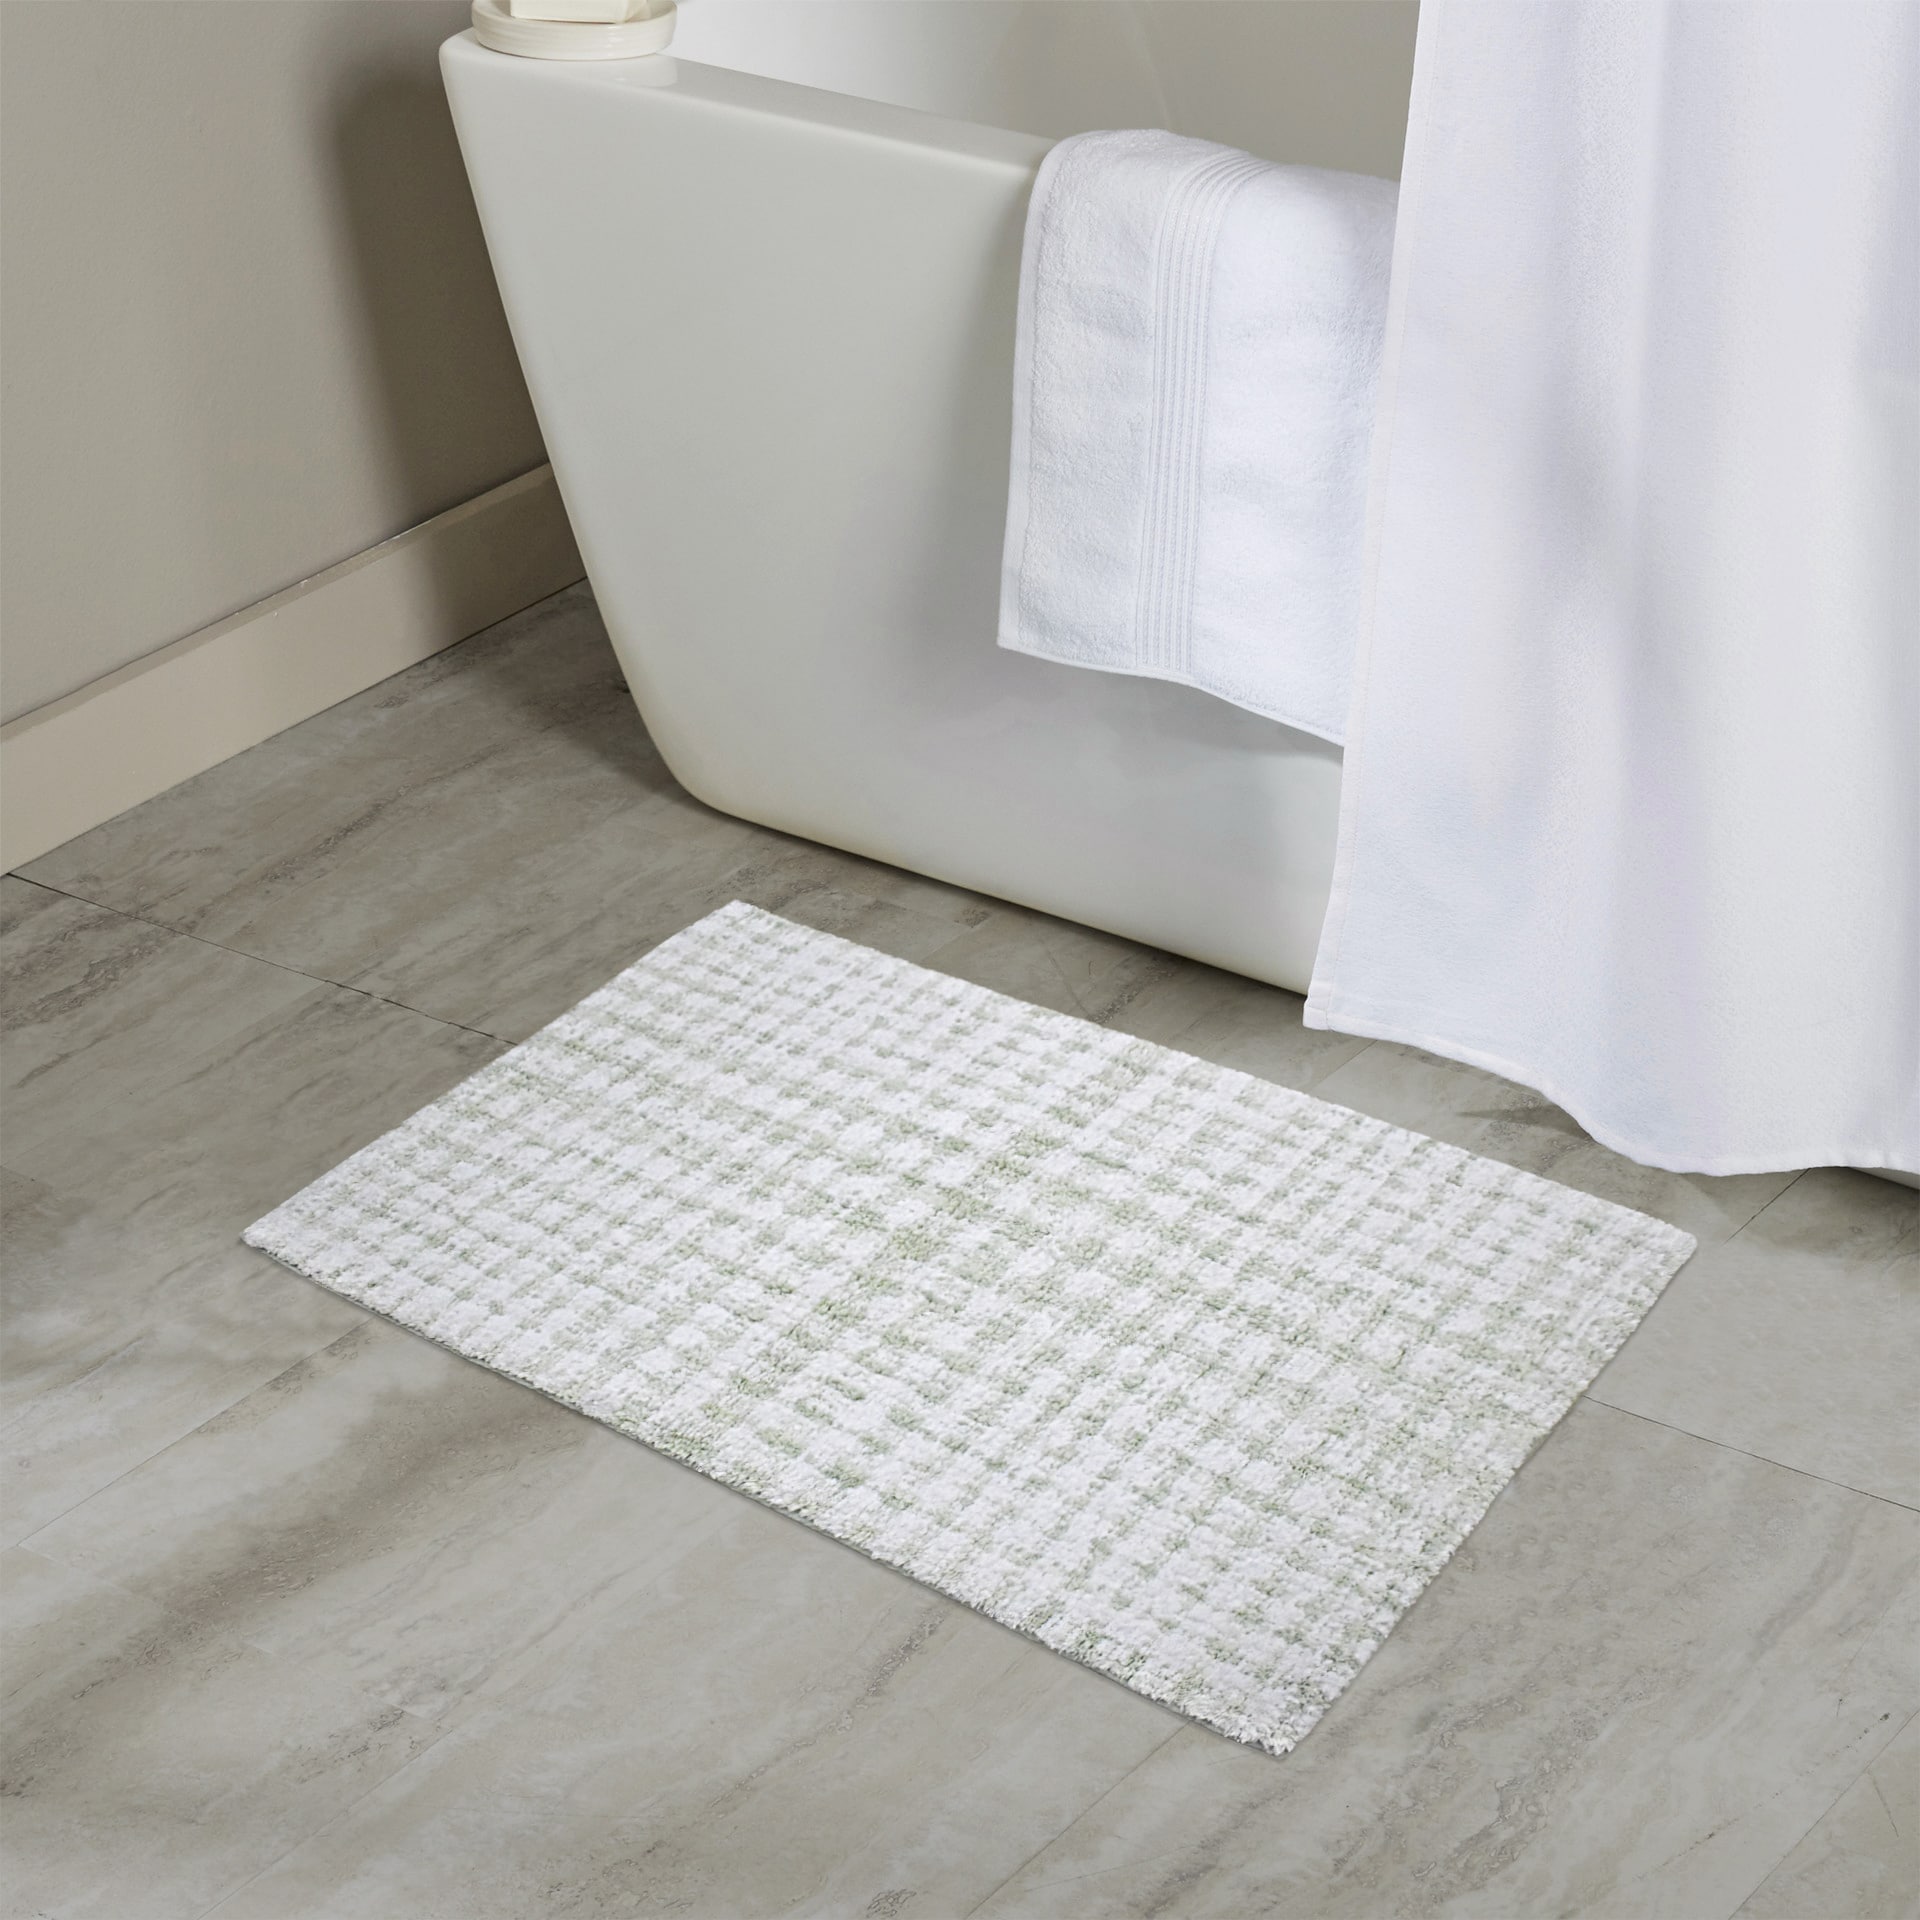 allen + roth 20-in x 32-in Dark Gray Polyester Bath Mat in the Bathroom Rugs  & Mats department at